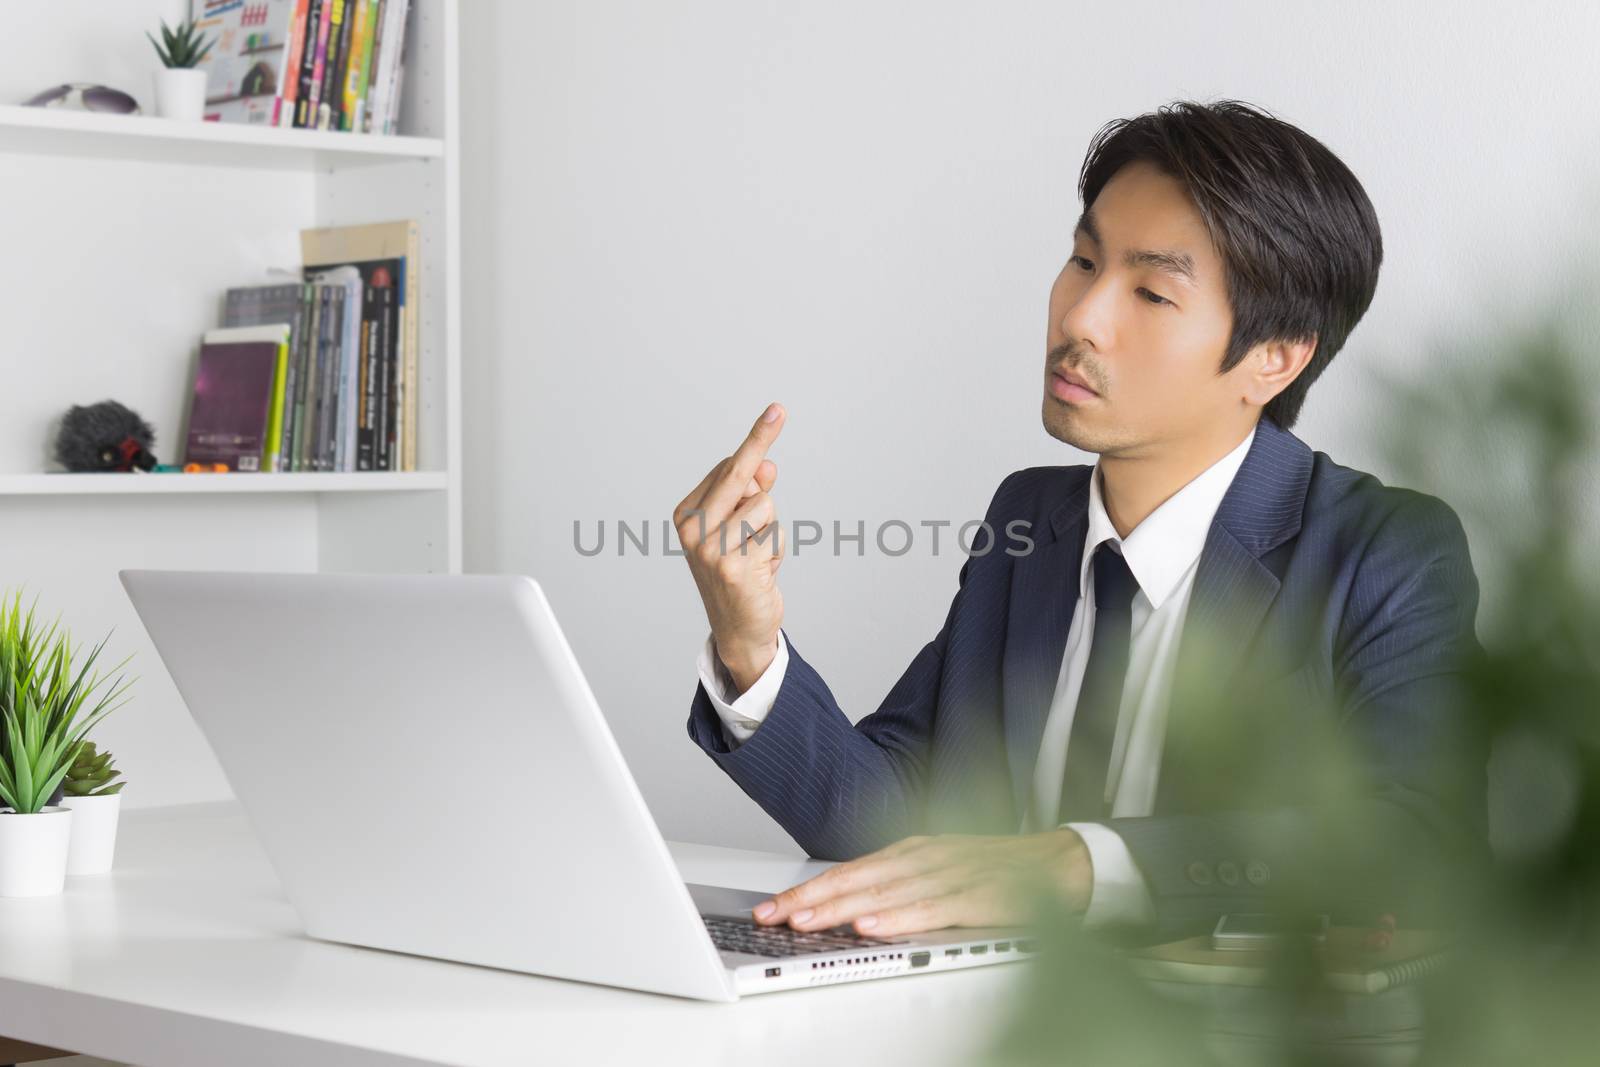 Angry Asian Businessman Show Middle Finger in front of Laptop by steafpong